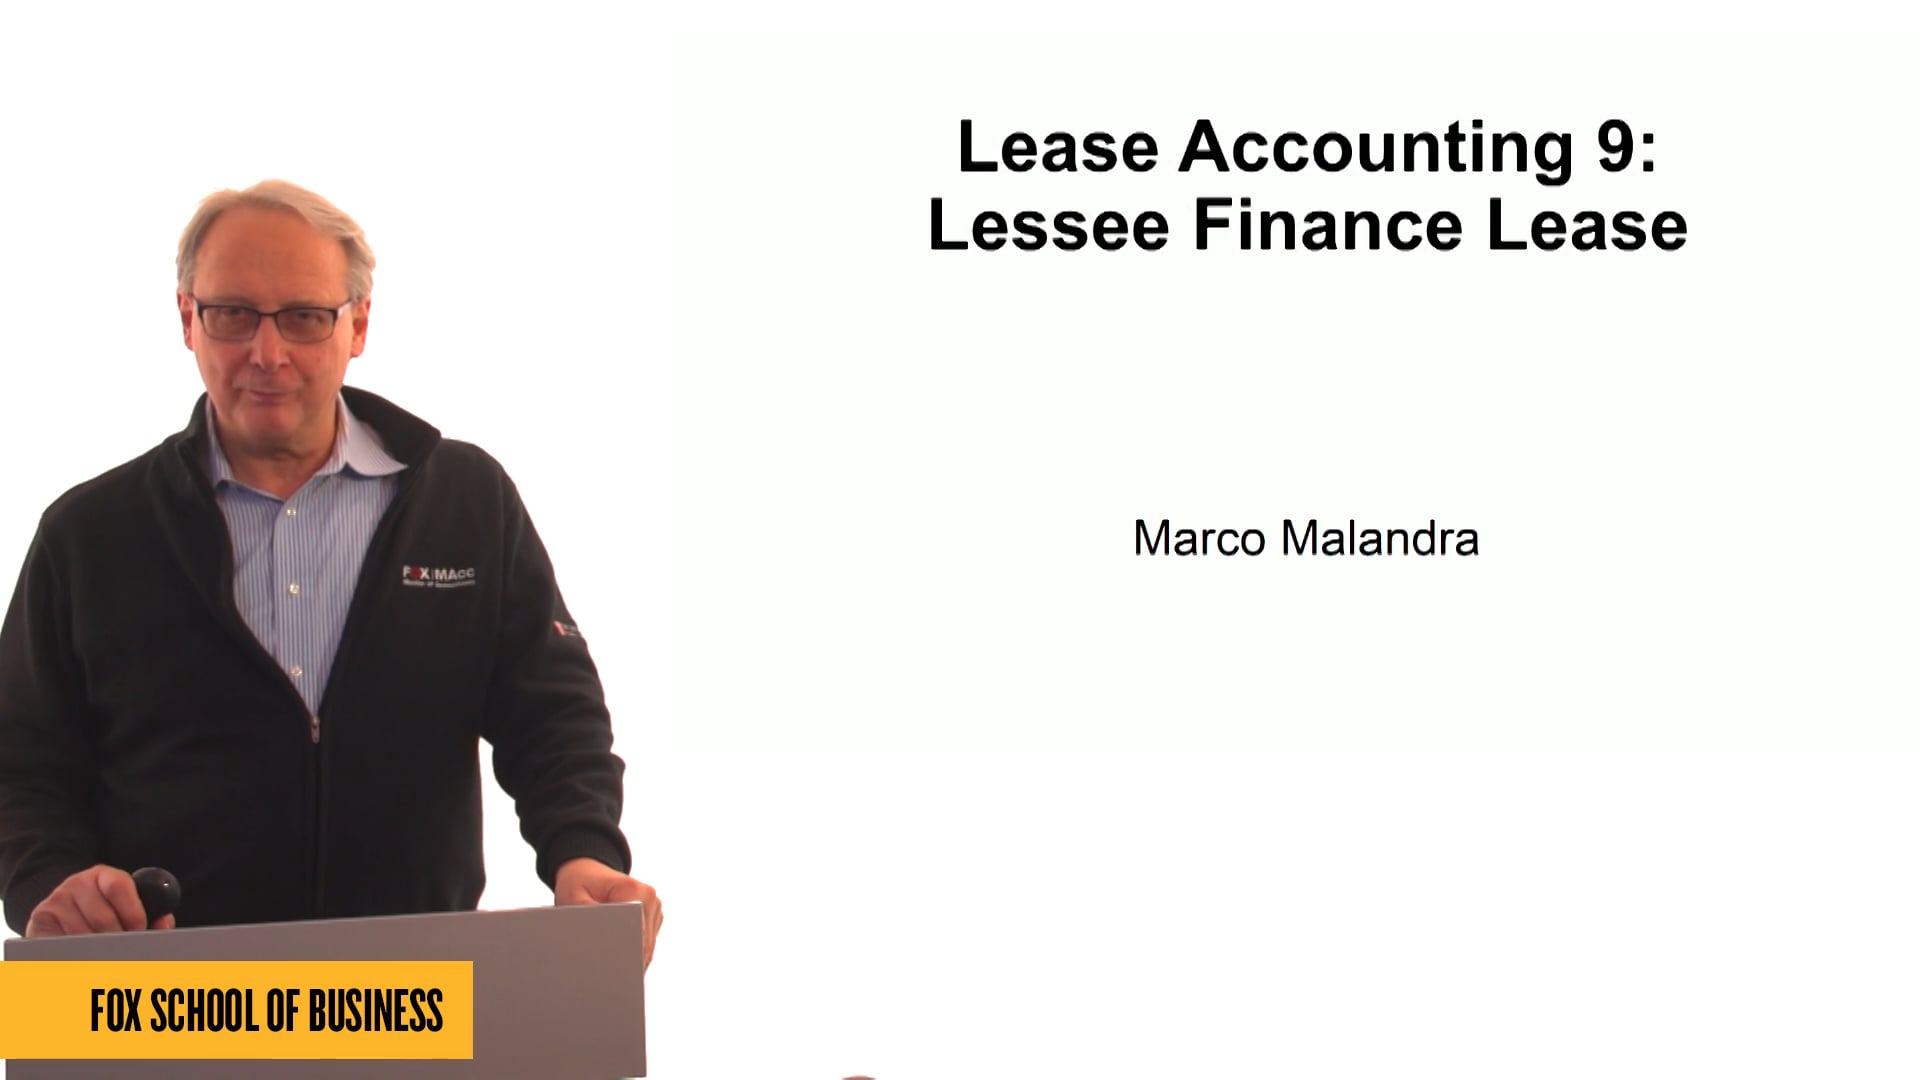 Lease Accounting 9: Lessee Finance Lease